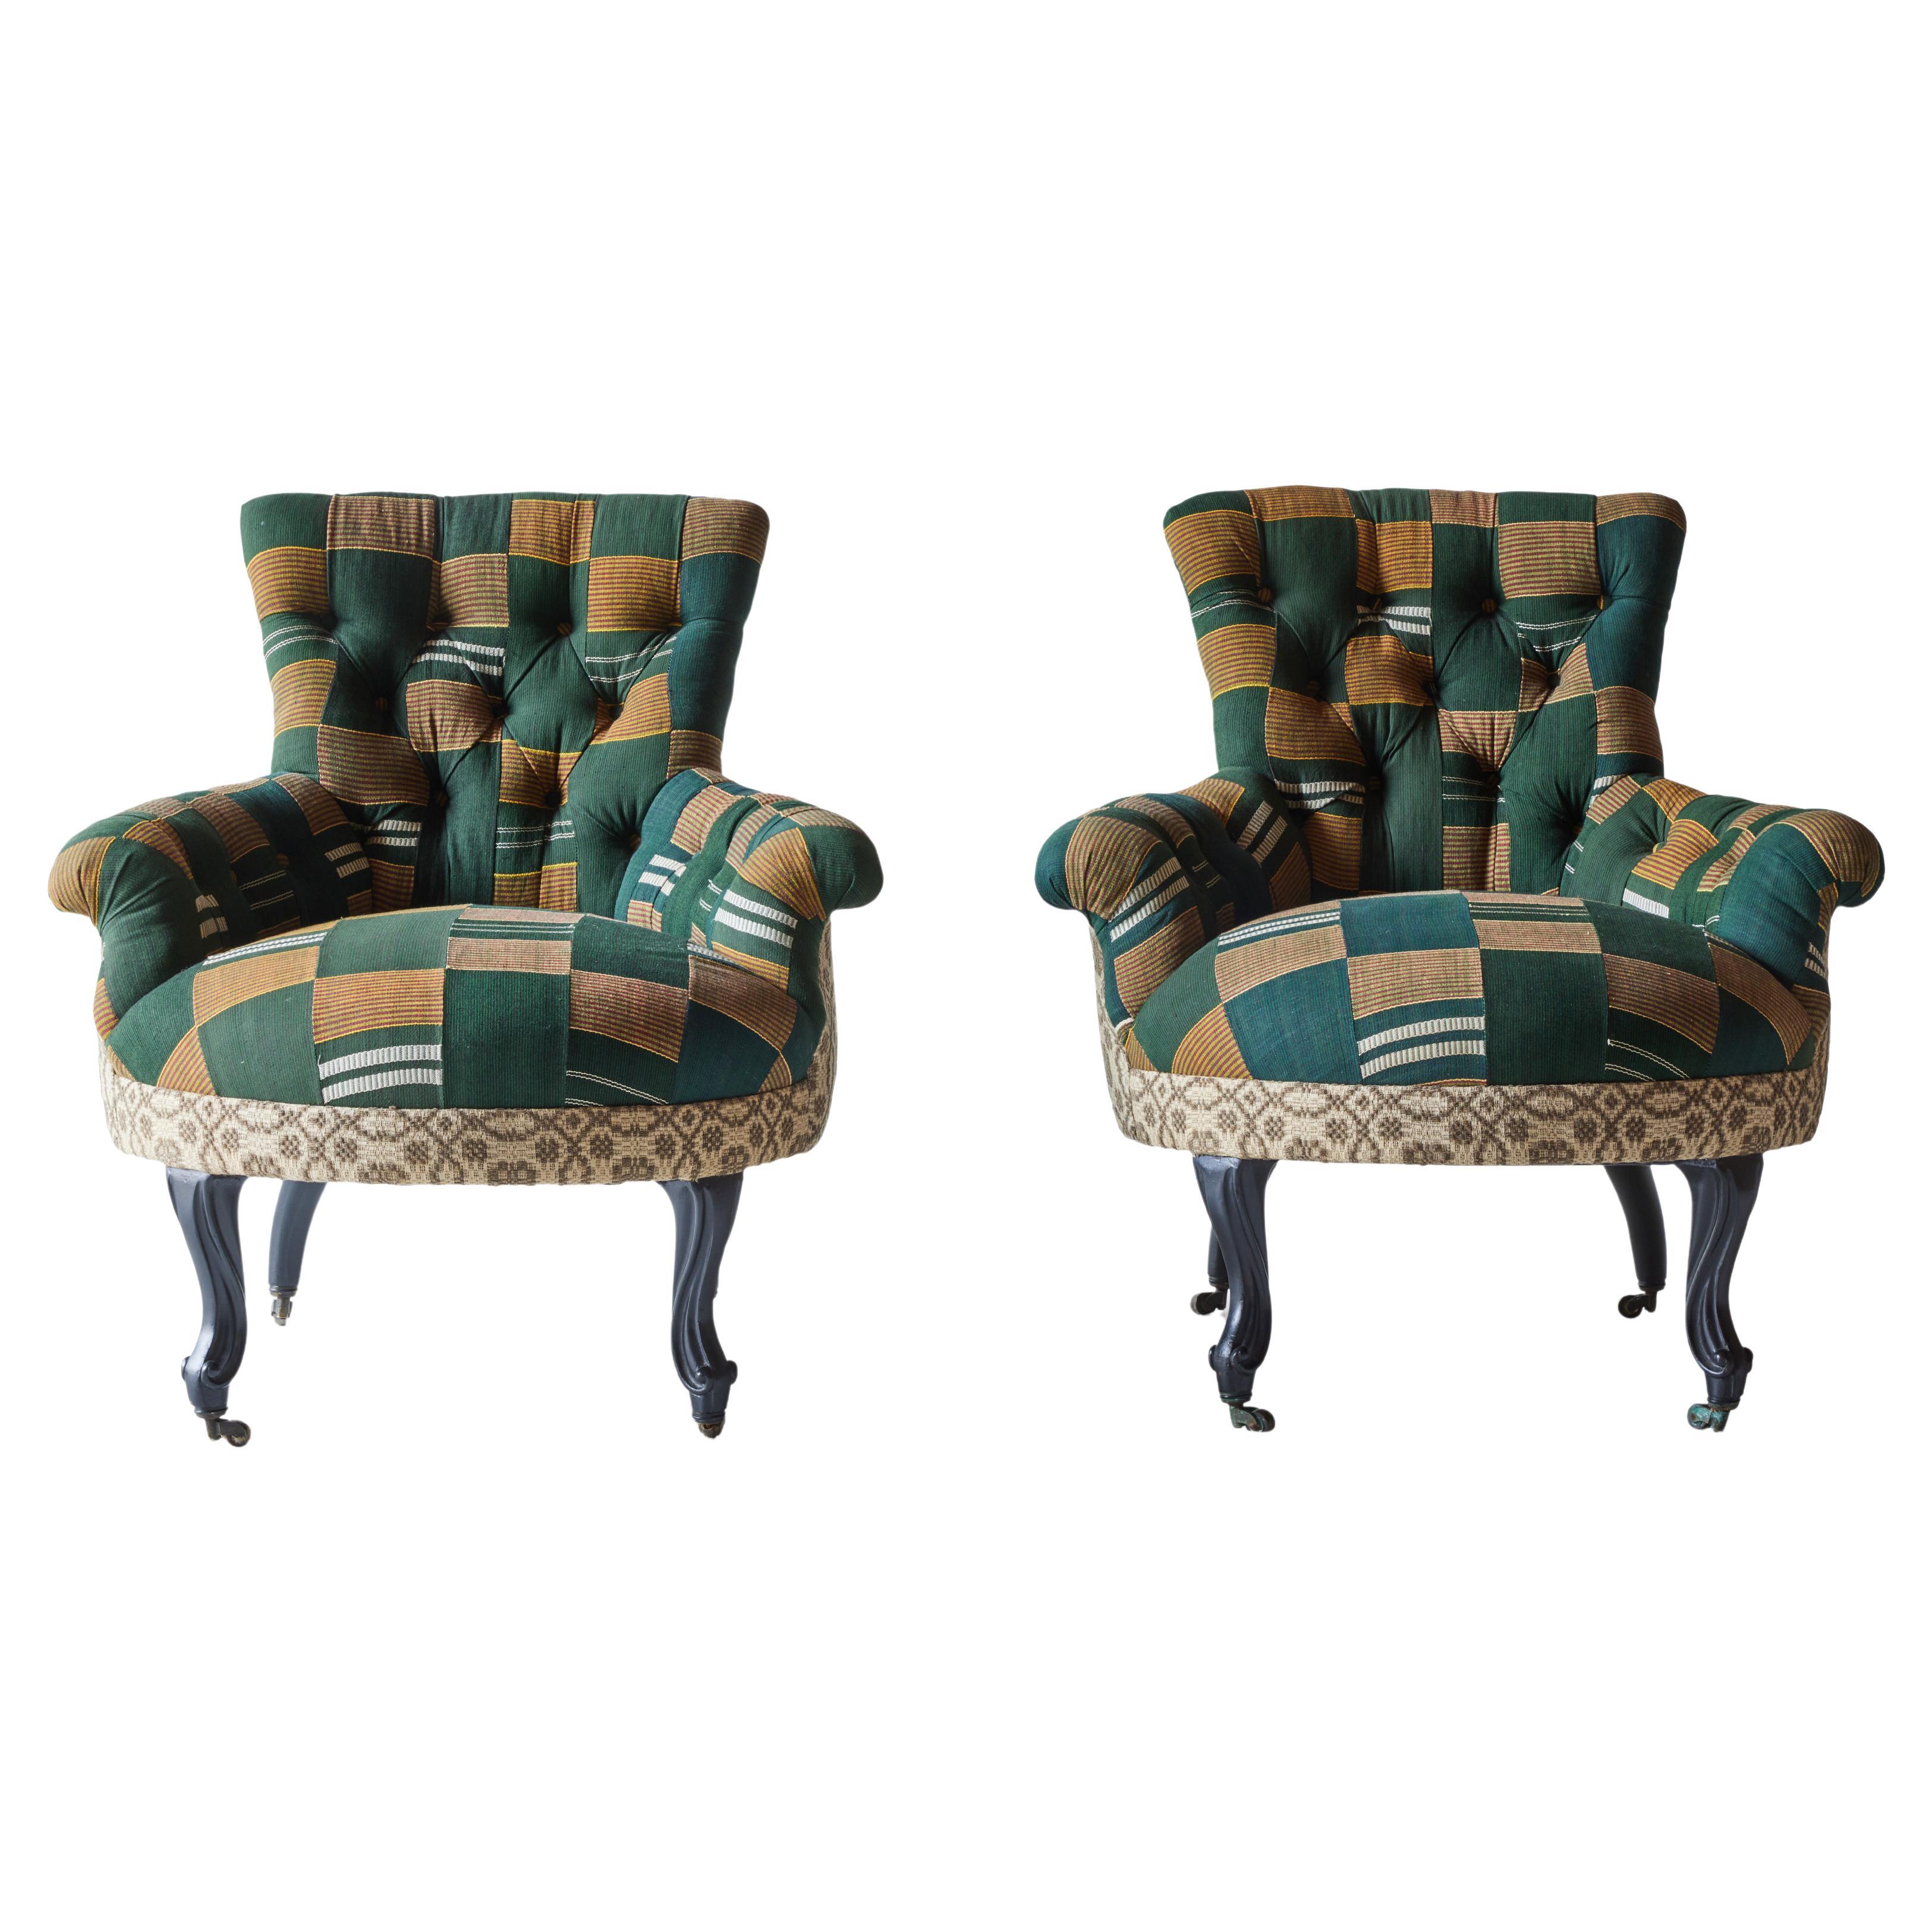 Pair of Tufted French Armchairs with Vintage Ewe and American Textiles